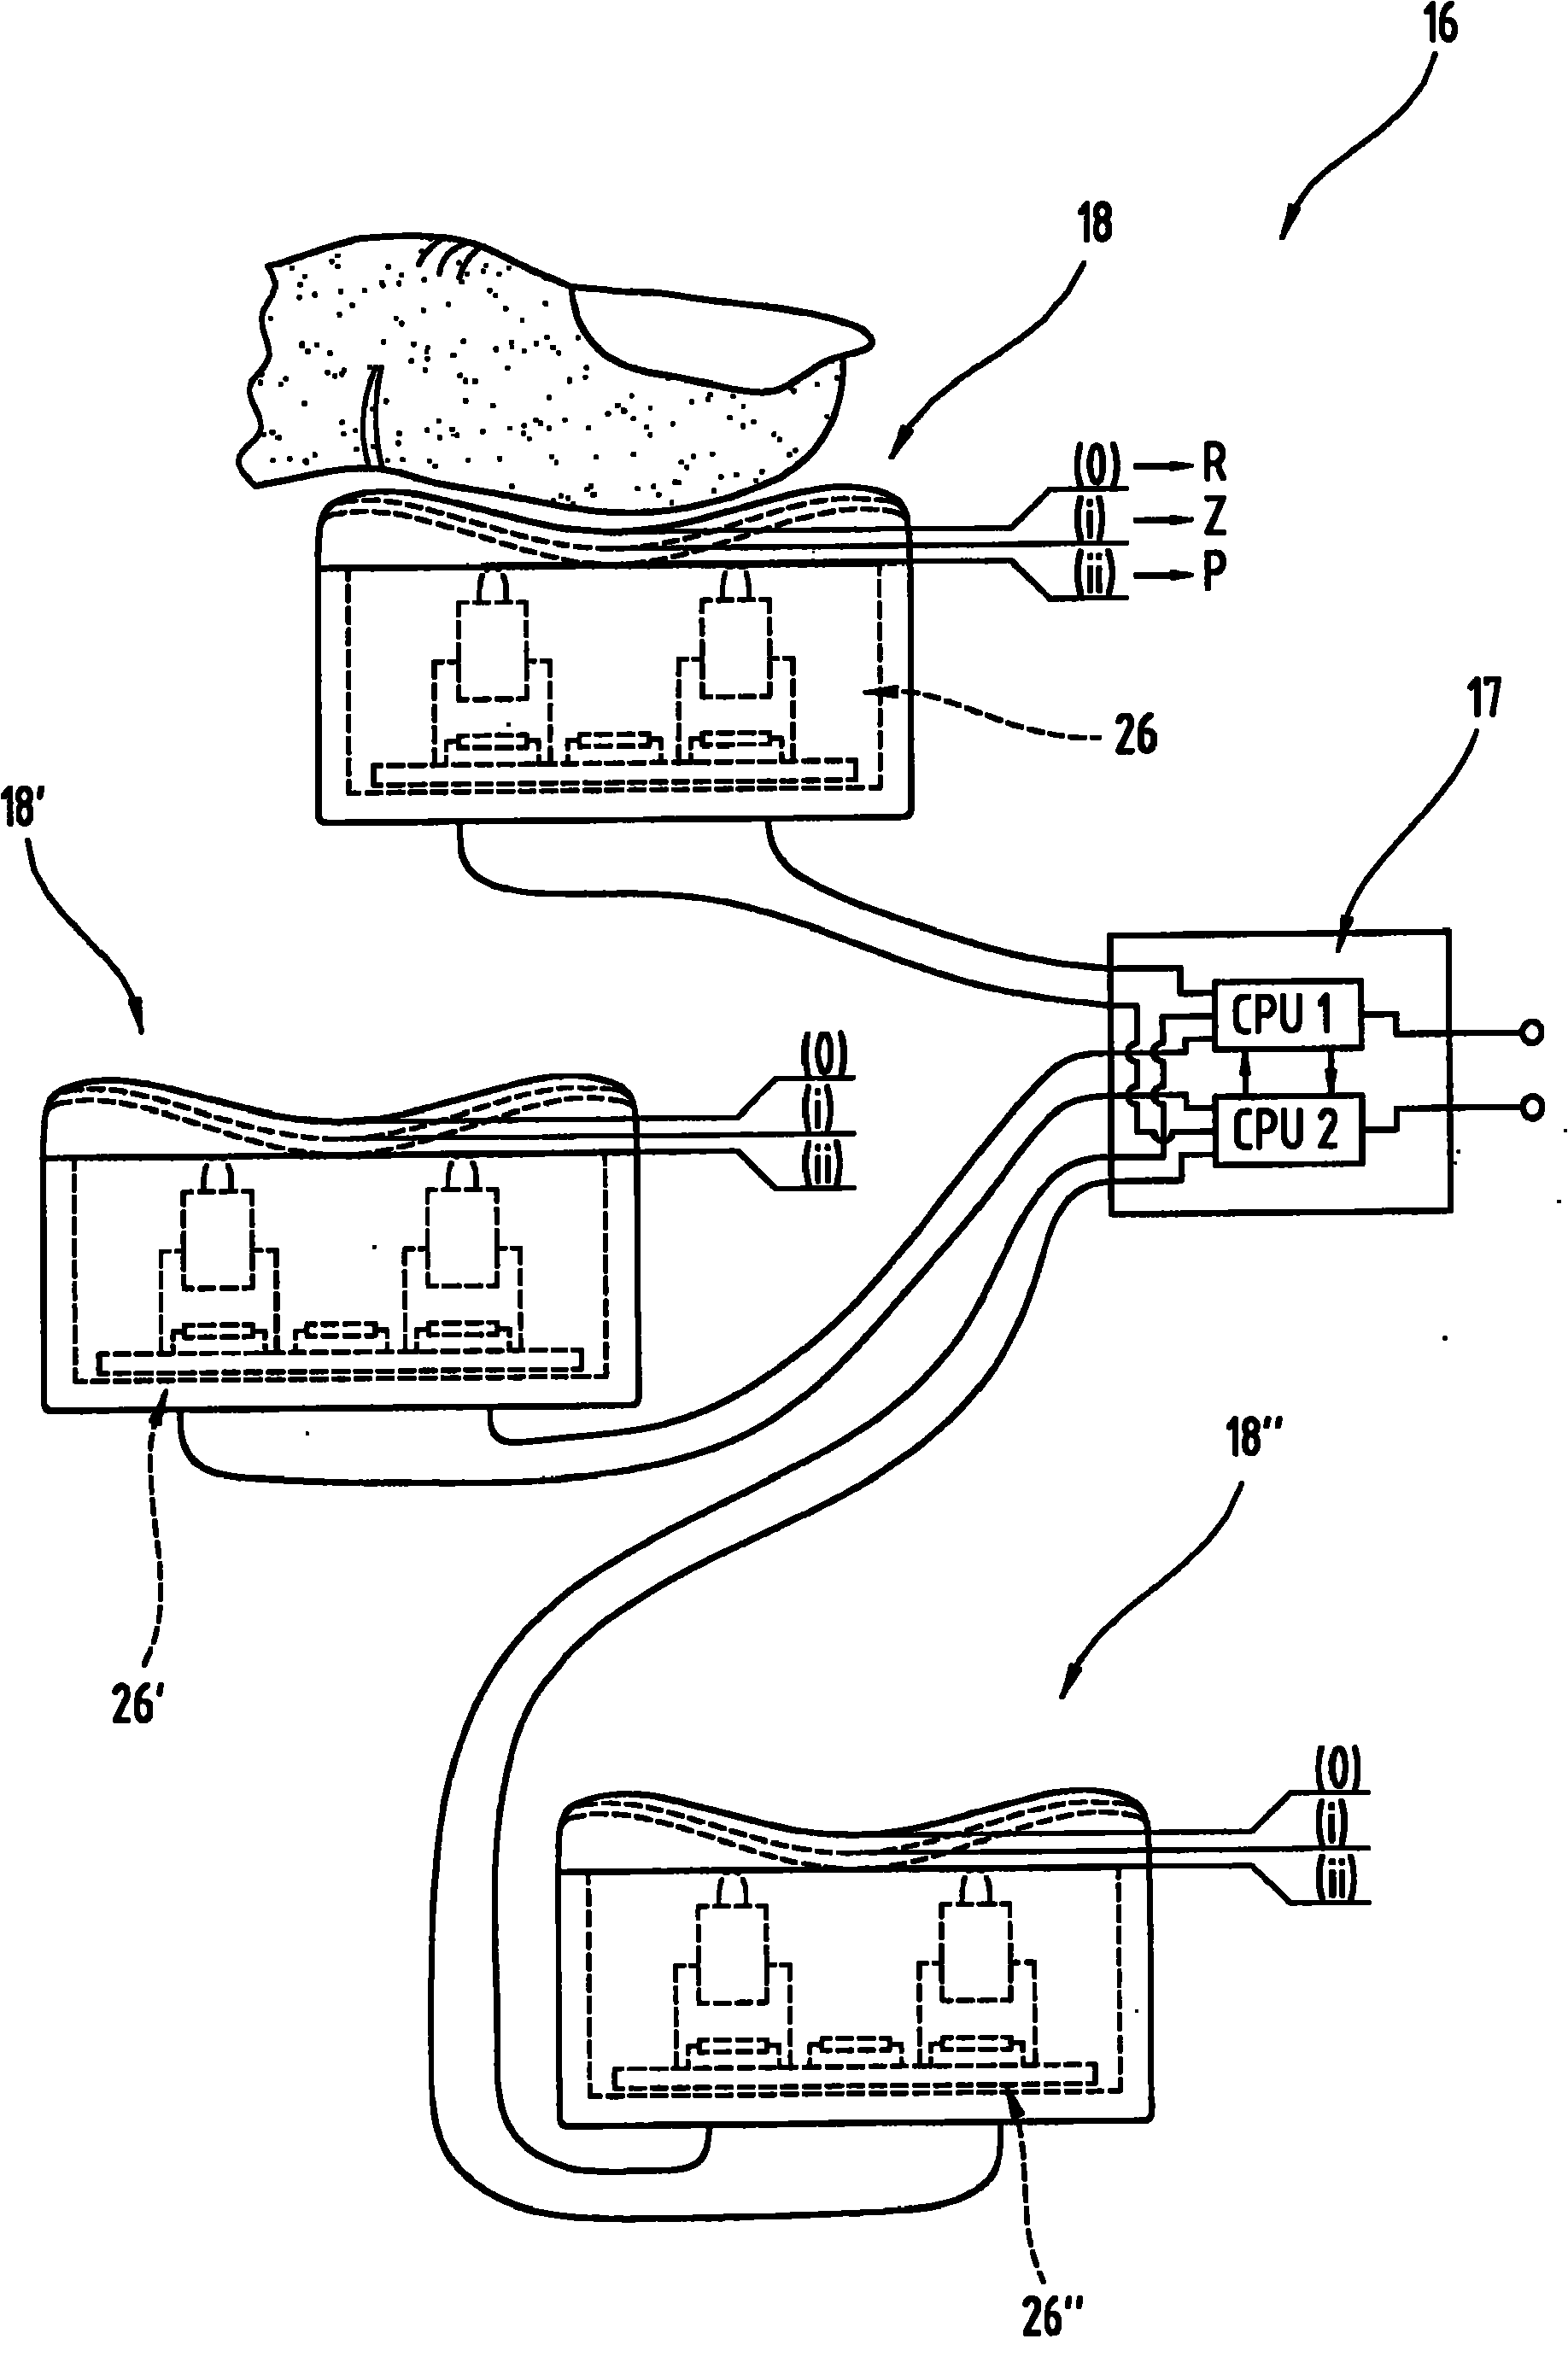 Method of operating a mobile hand-operated device for outputting or enabling potentially dangerous control commands and corresponding hand-operated device